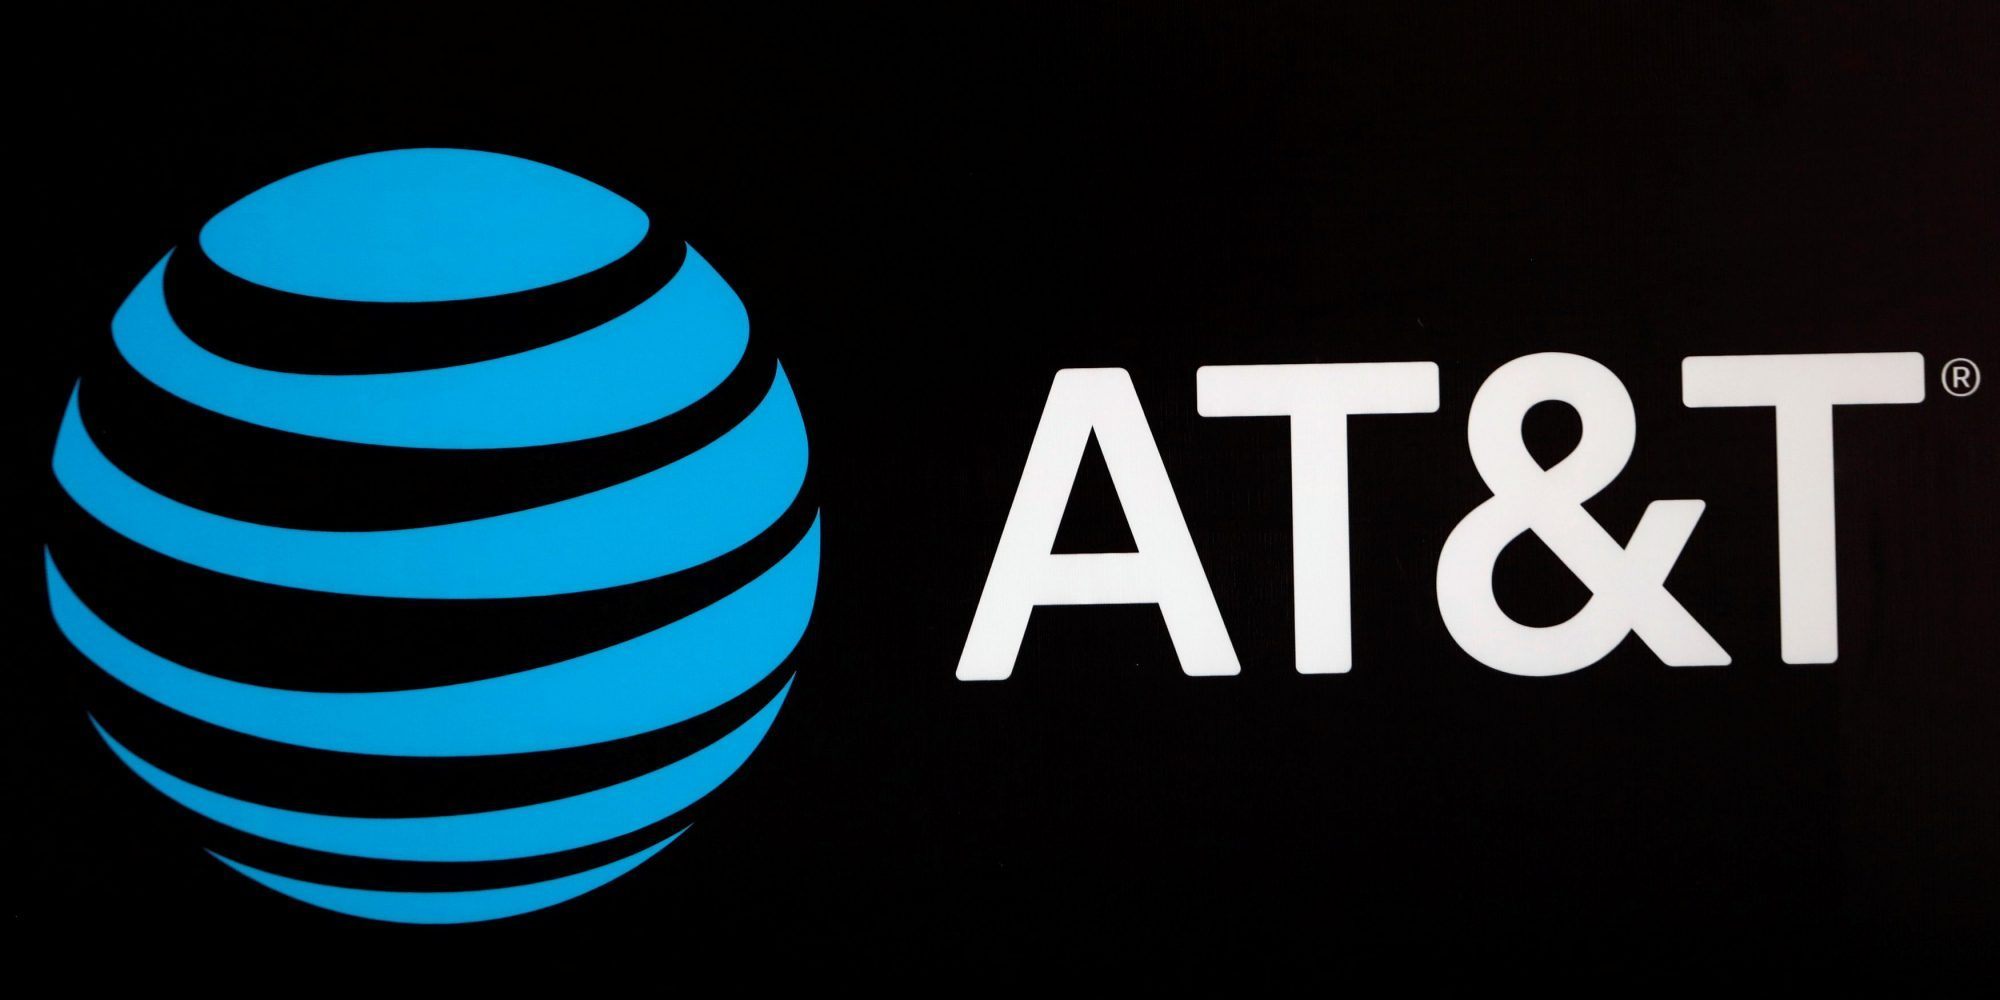 AT&T Lost 620,000 Video Subscribers in Q1 2021